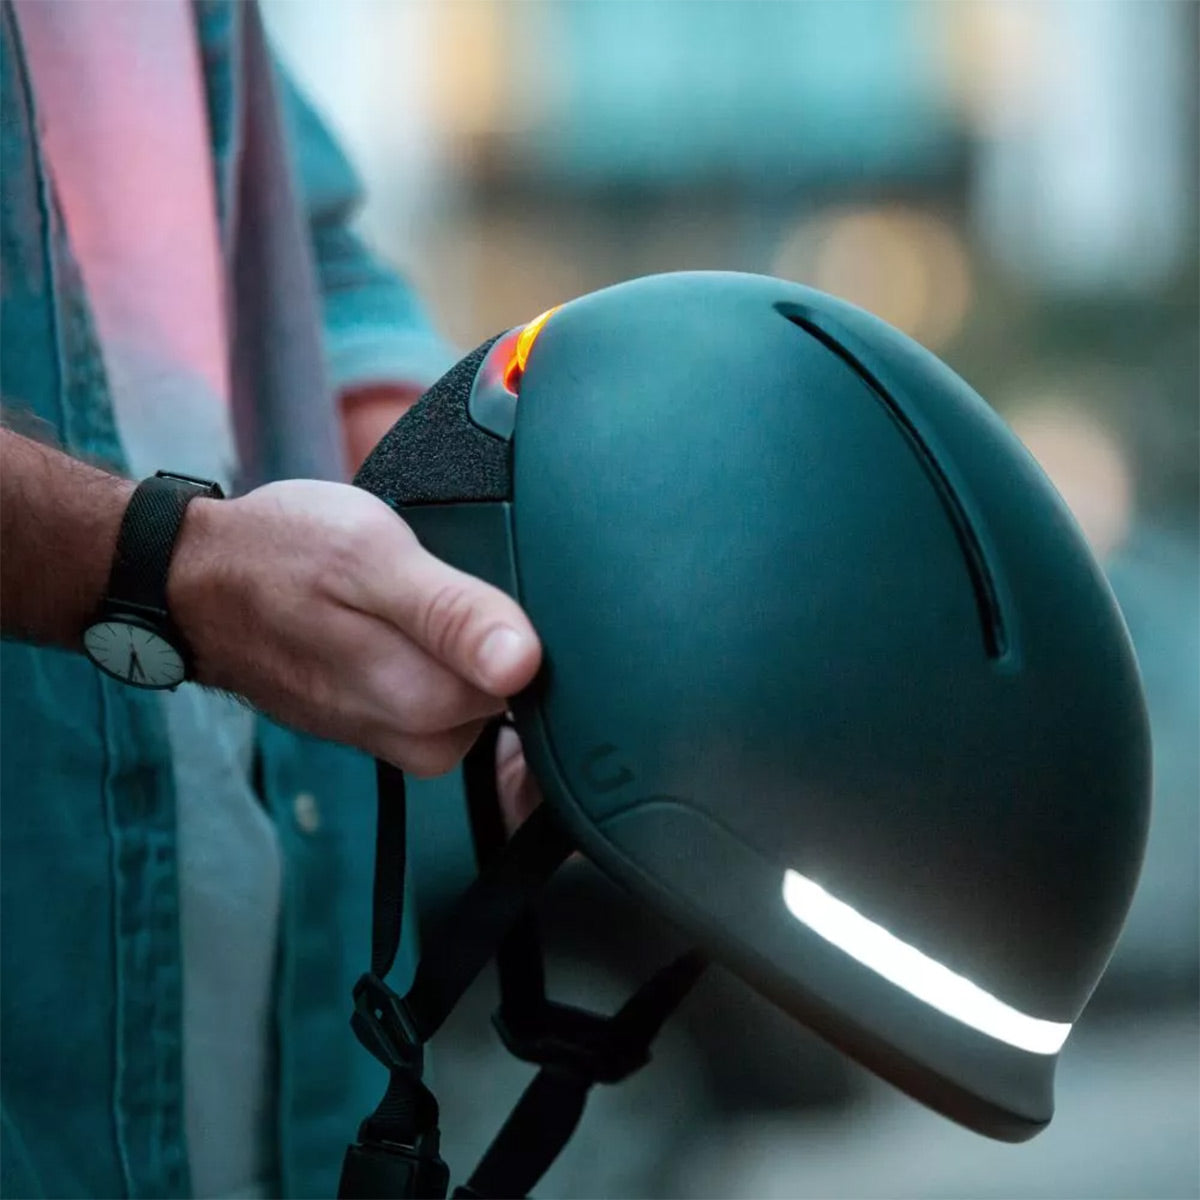 Unit 1 FARO Waterproof Smart Helmet with Mips Impact Safety System & LED Lights - Large (Blackbird)